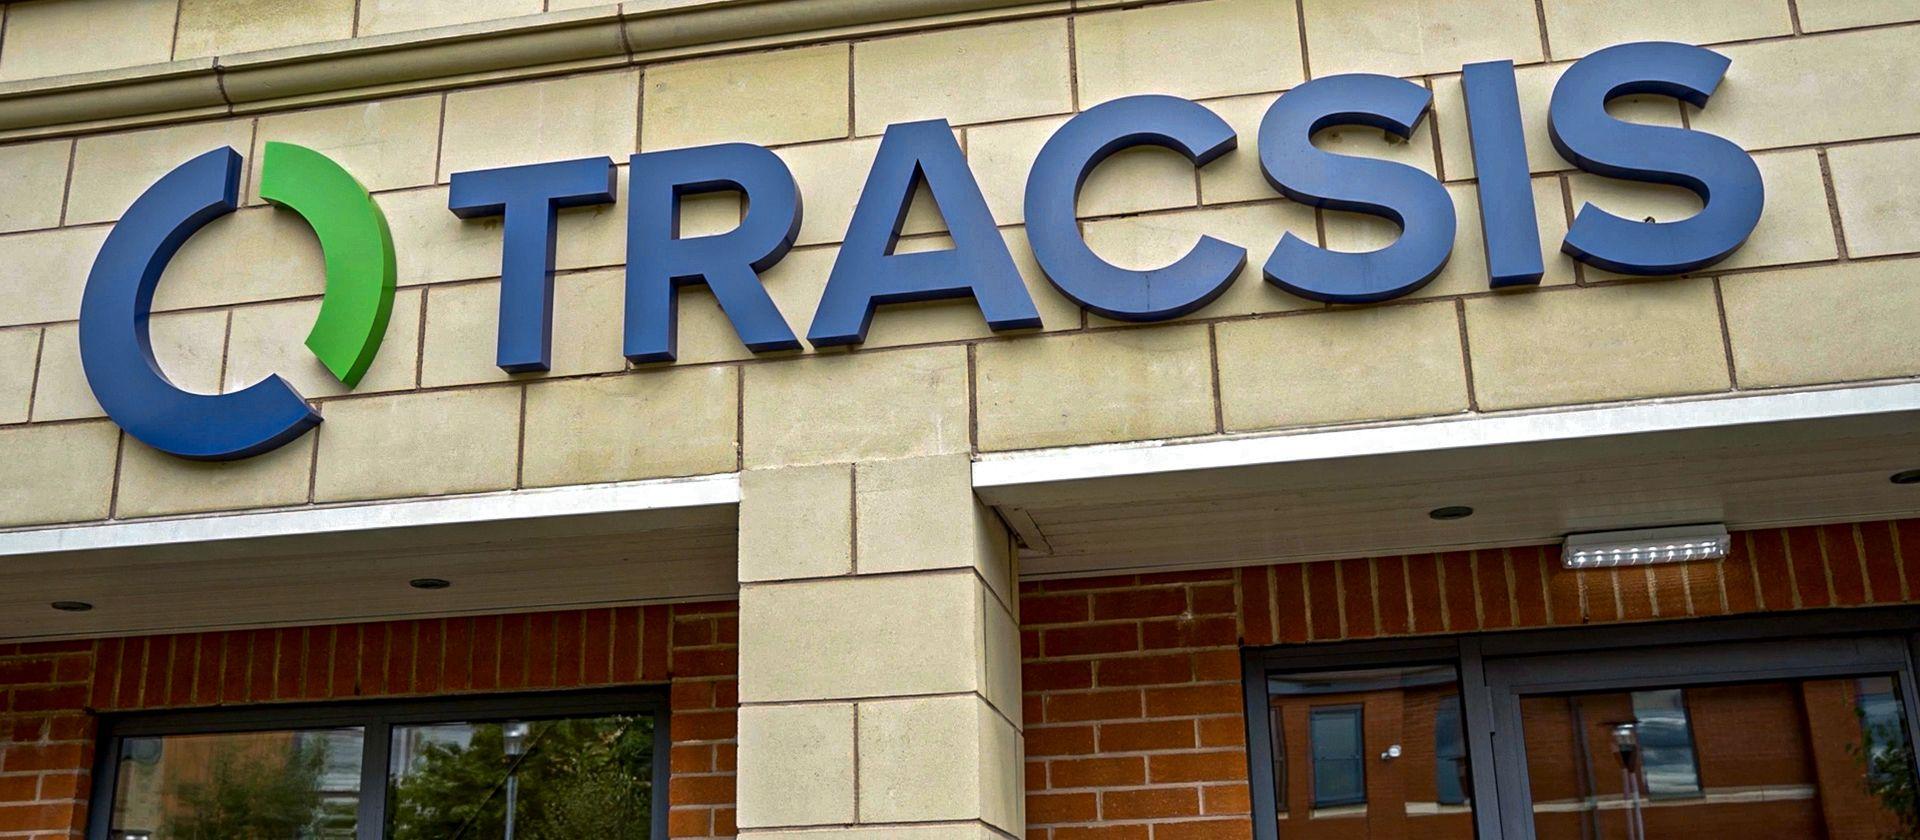 The Tracsis logo on a building.